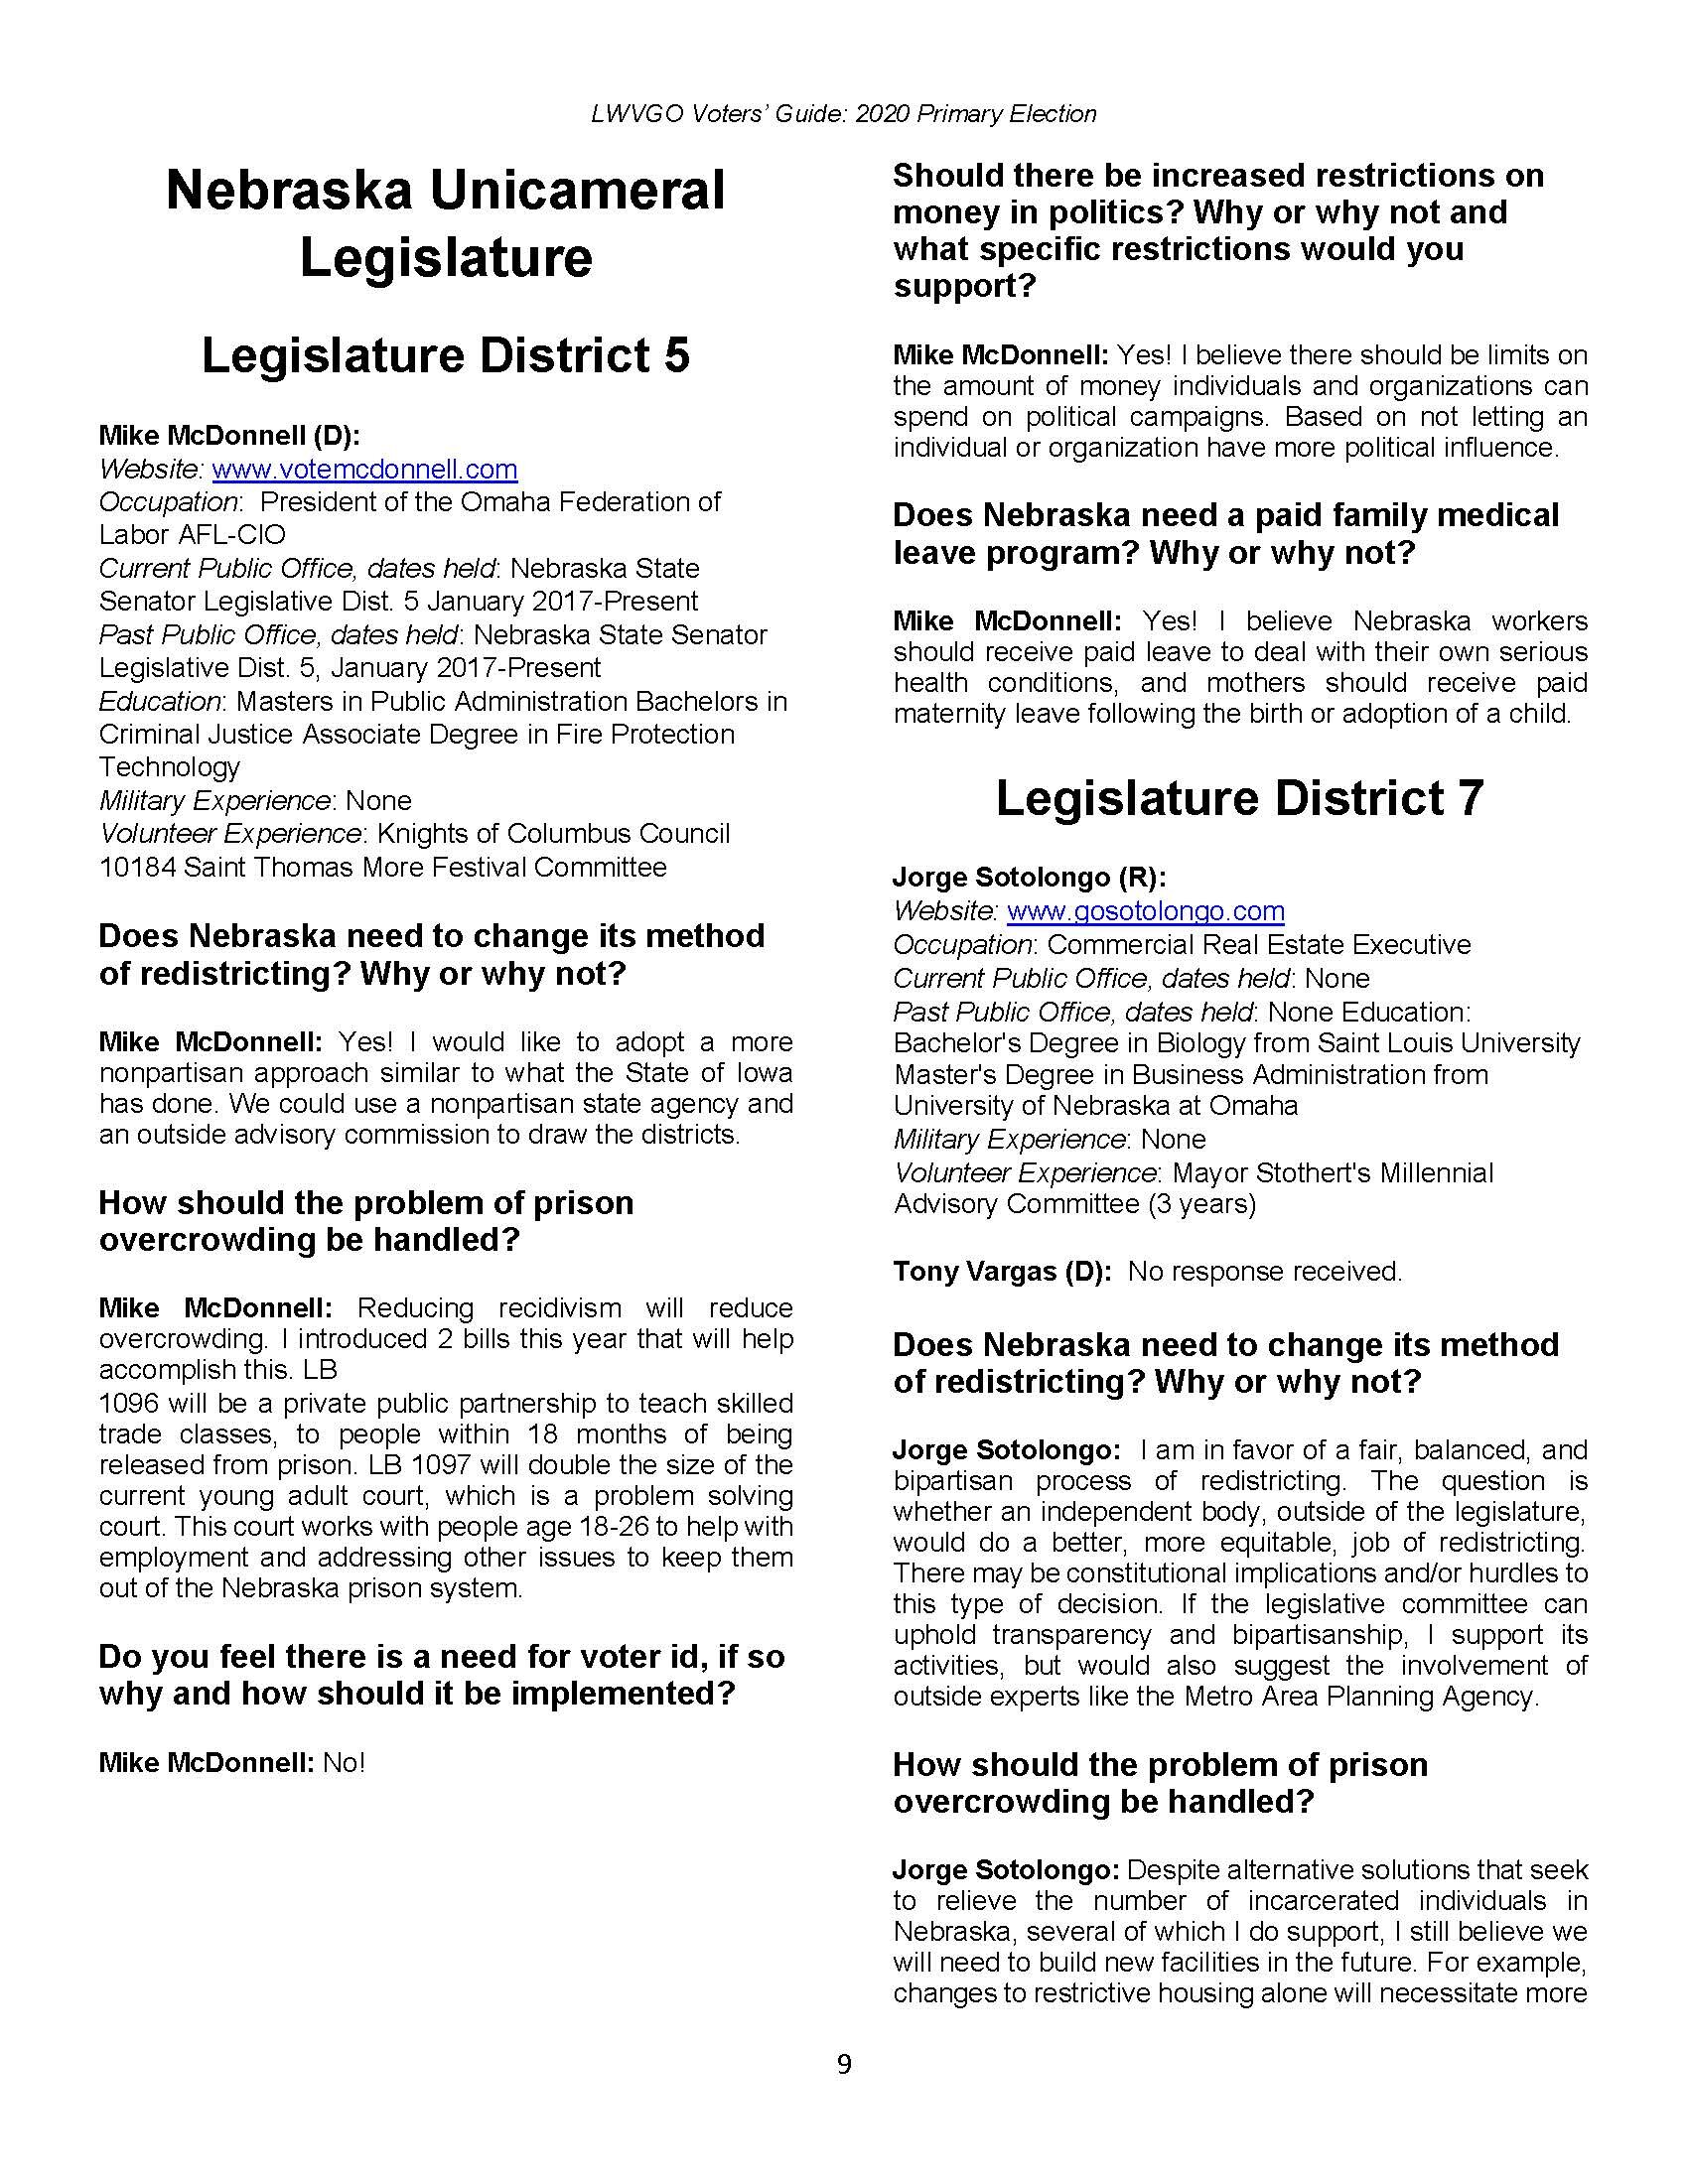 2020-Primary-Voters-Guide-LWVGO_0_Page_09.jpg